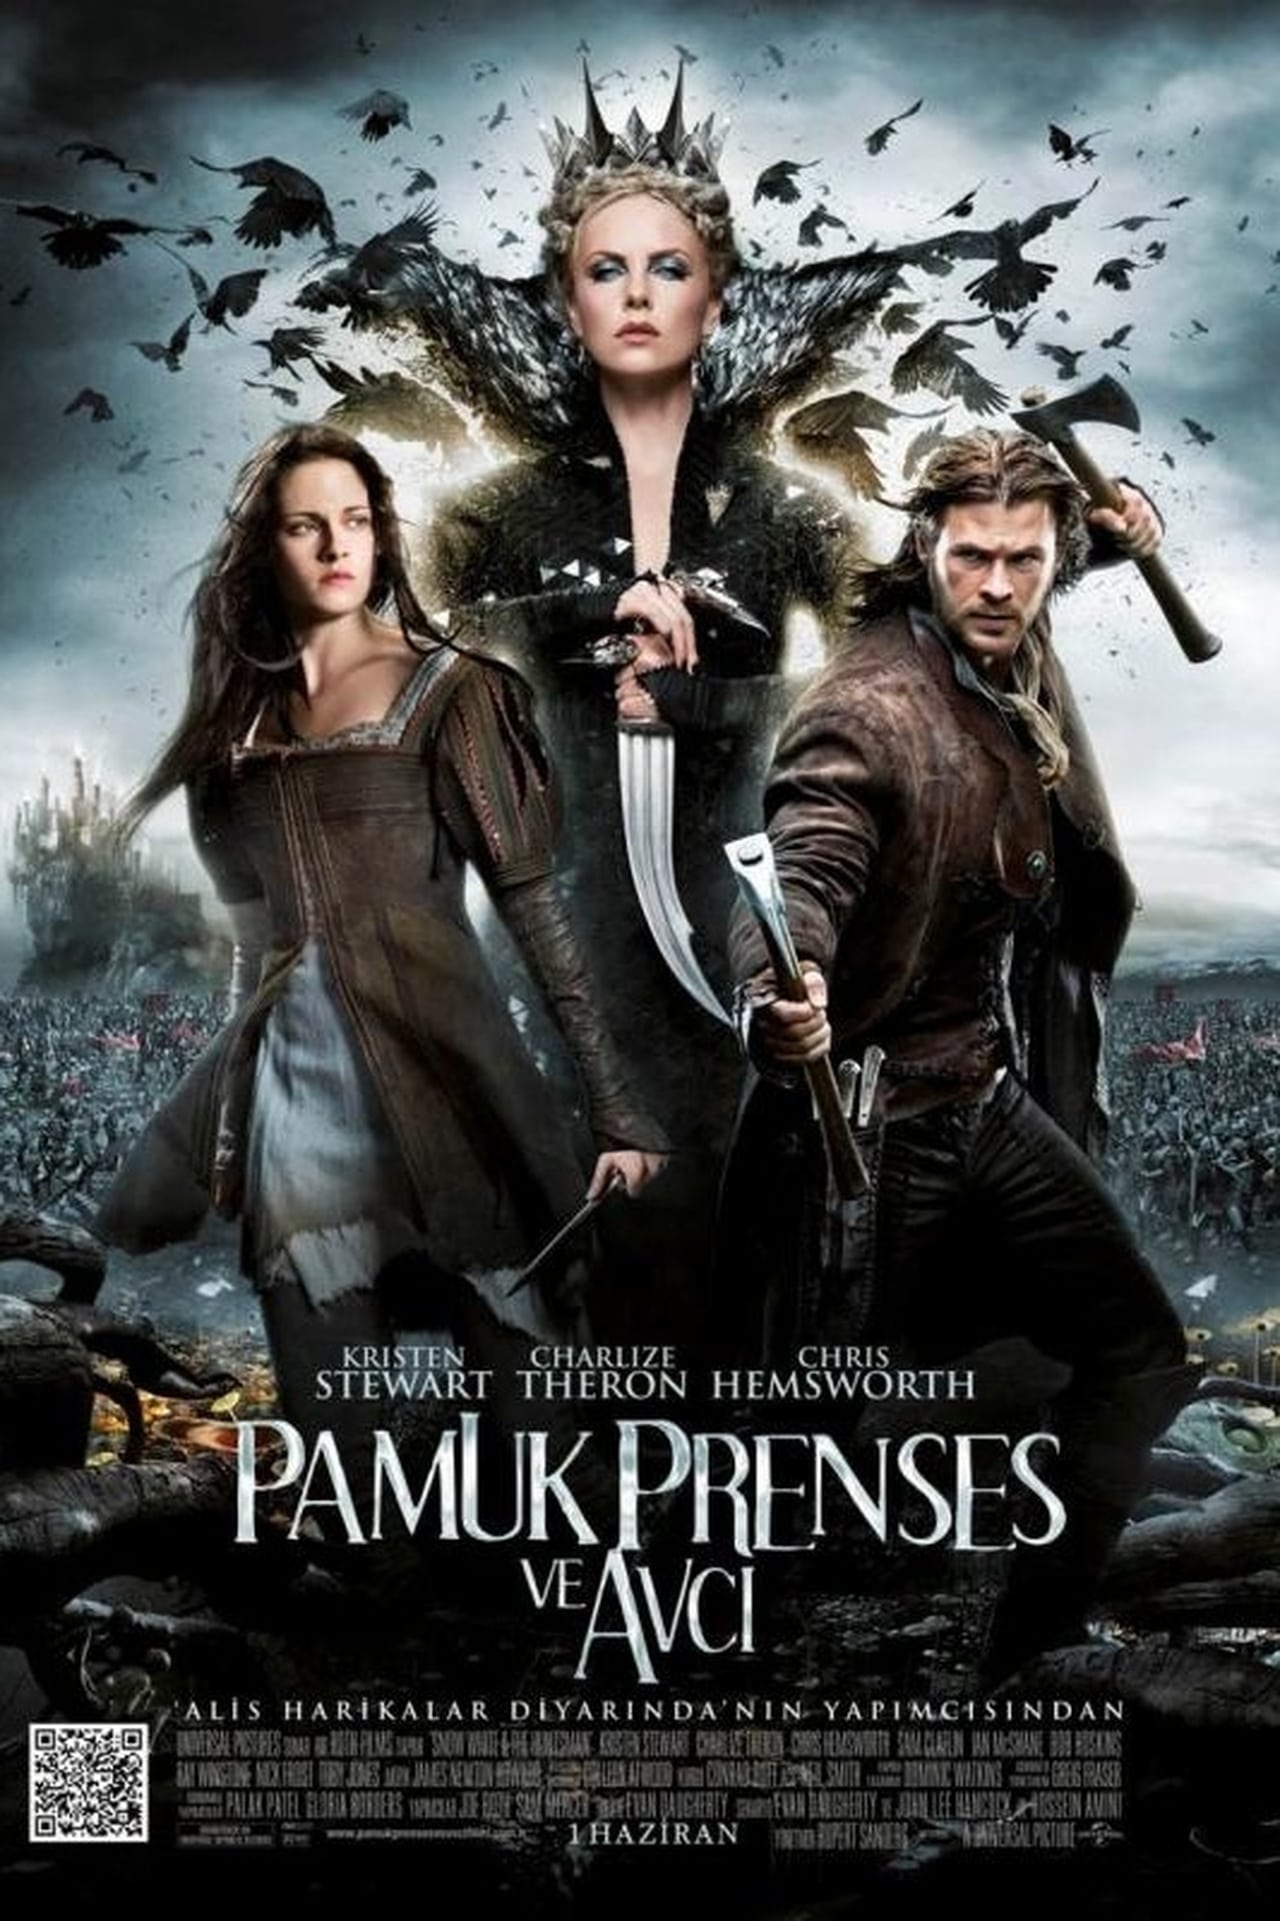 Snow White and the Huntsman (2012) Theatrical Cut 640Kbps 23.976Fps 48Khz 5.1Ch DD+ NF E-AC3 Turkish Audio TAC